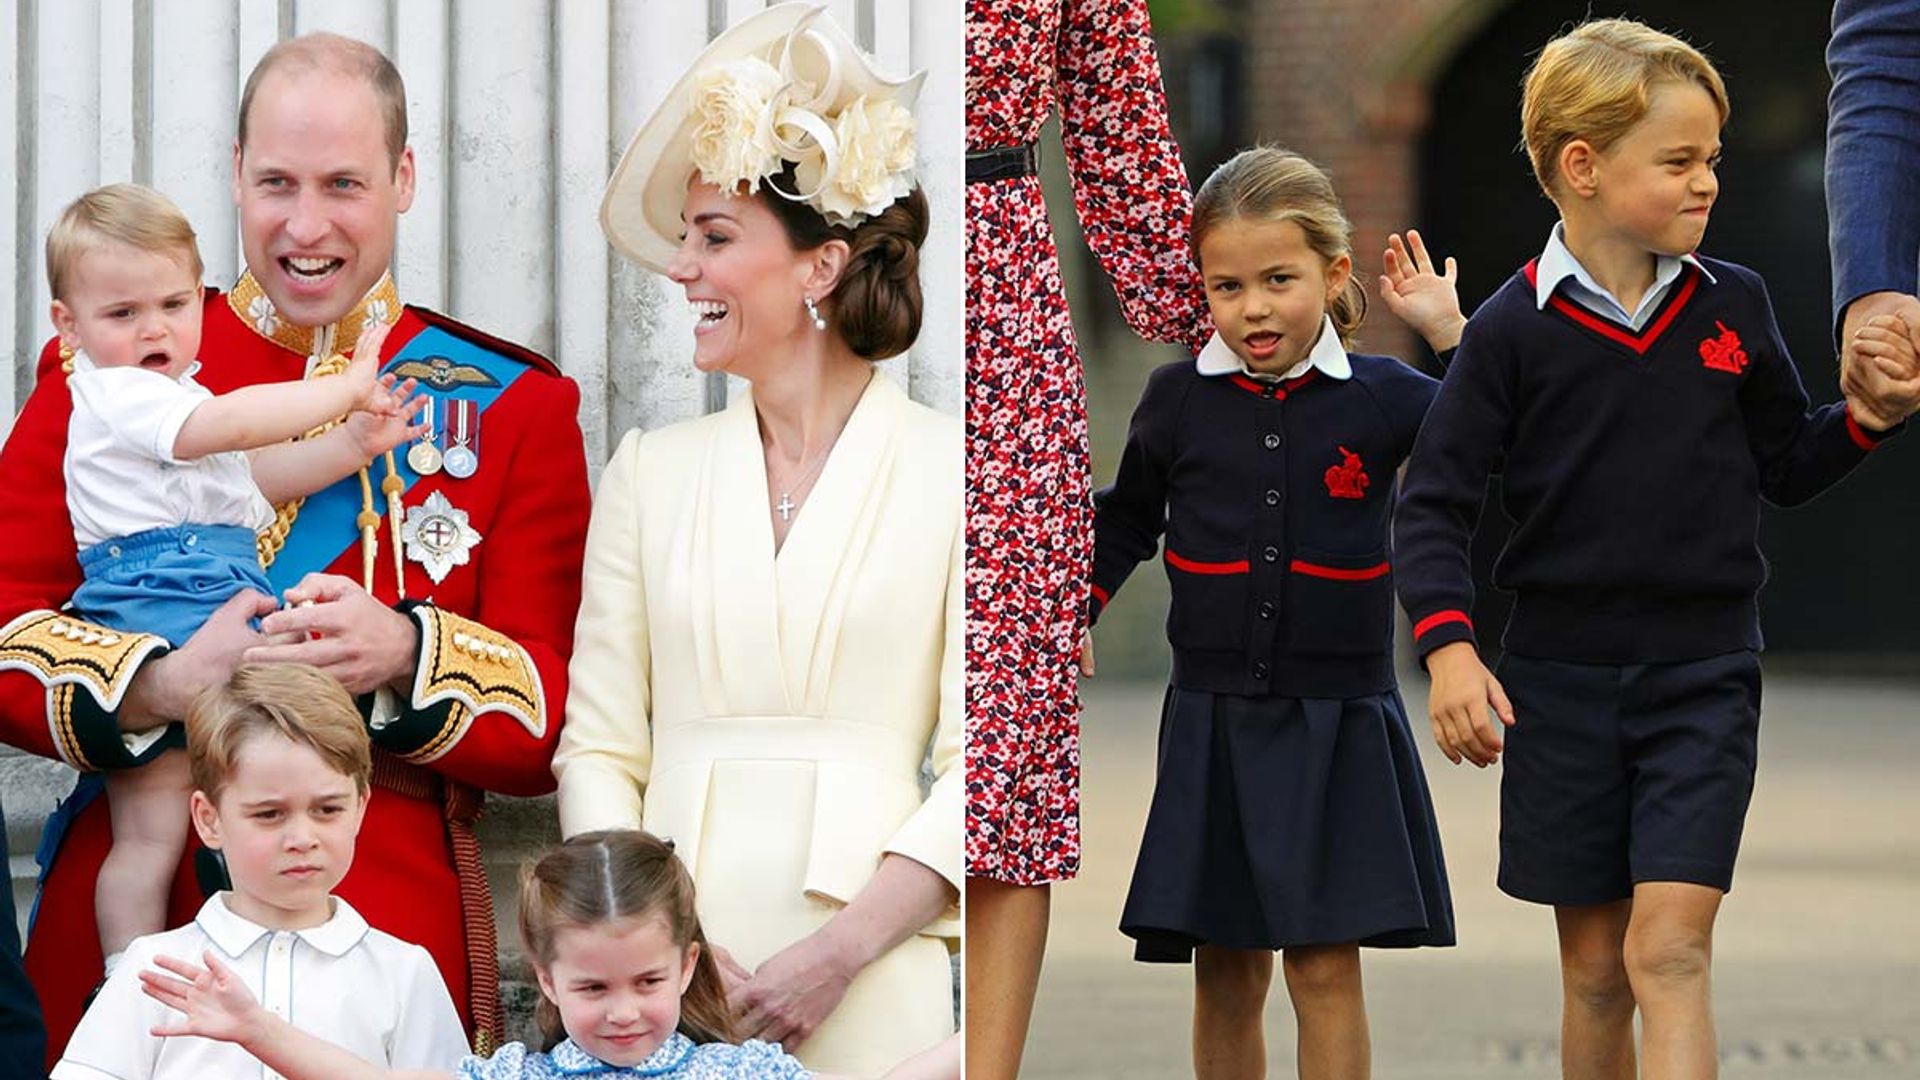 Inside Prince William & Princess Kate's school night dinners for George, Charlotte and Louis